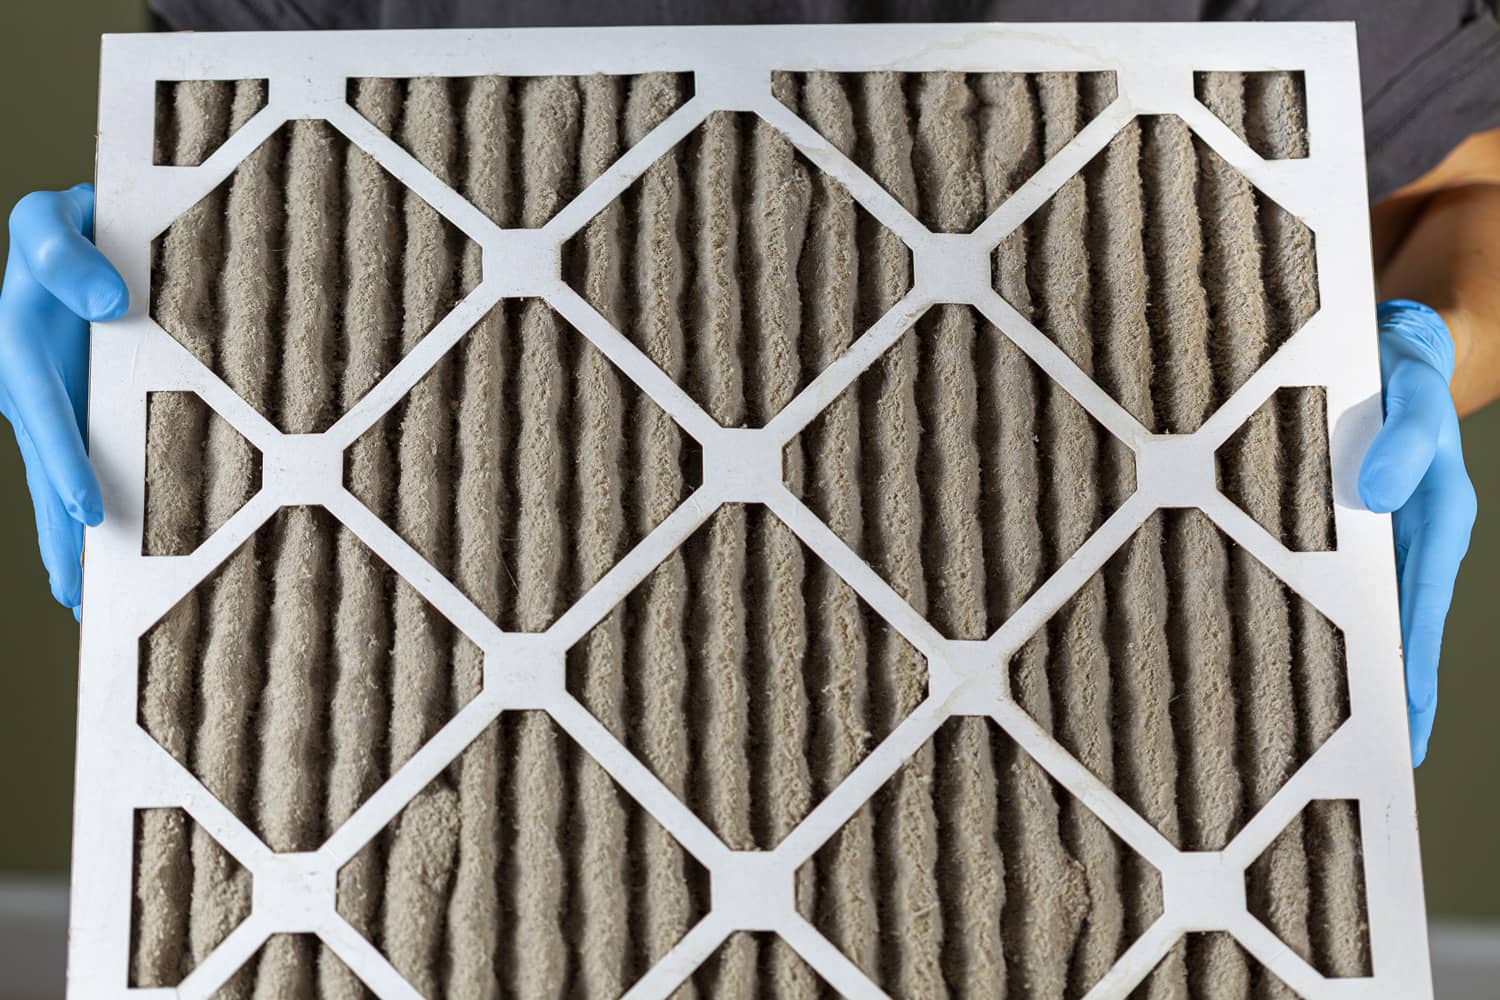 Someone holding a very dirty clogged air conditioner furnace filter